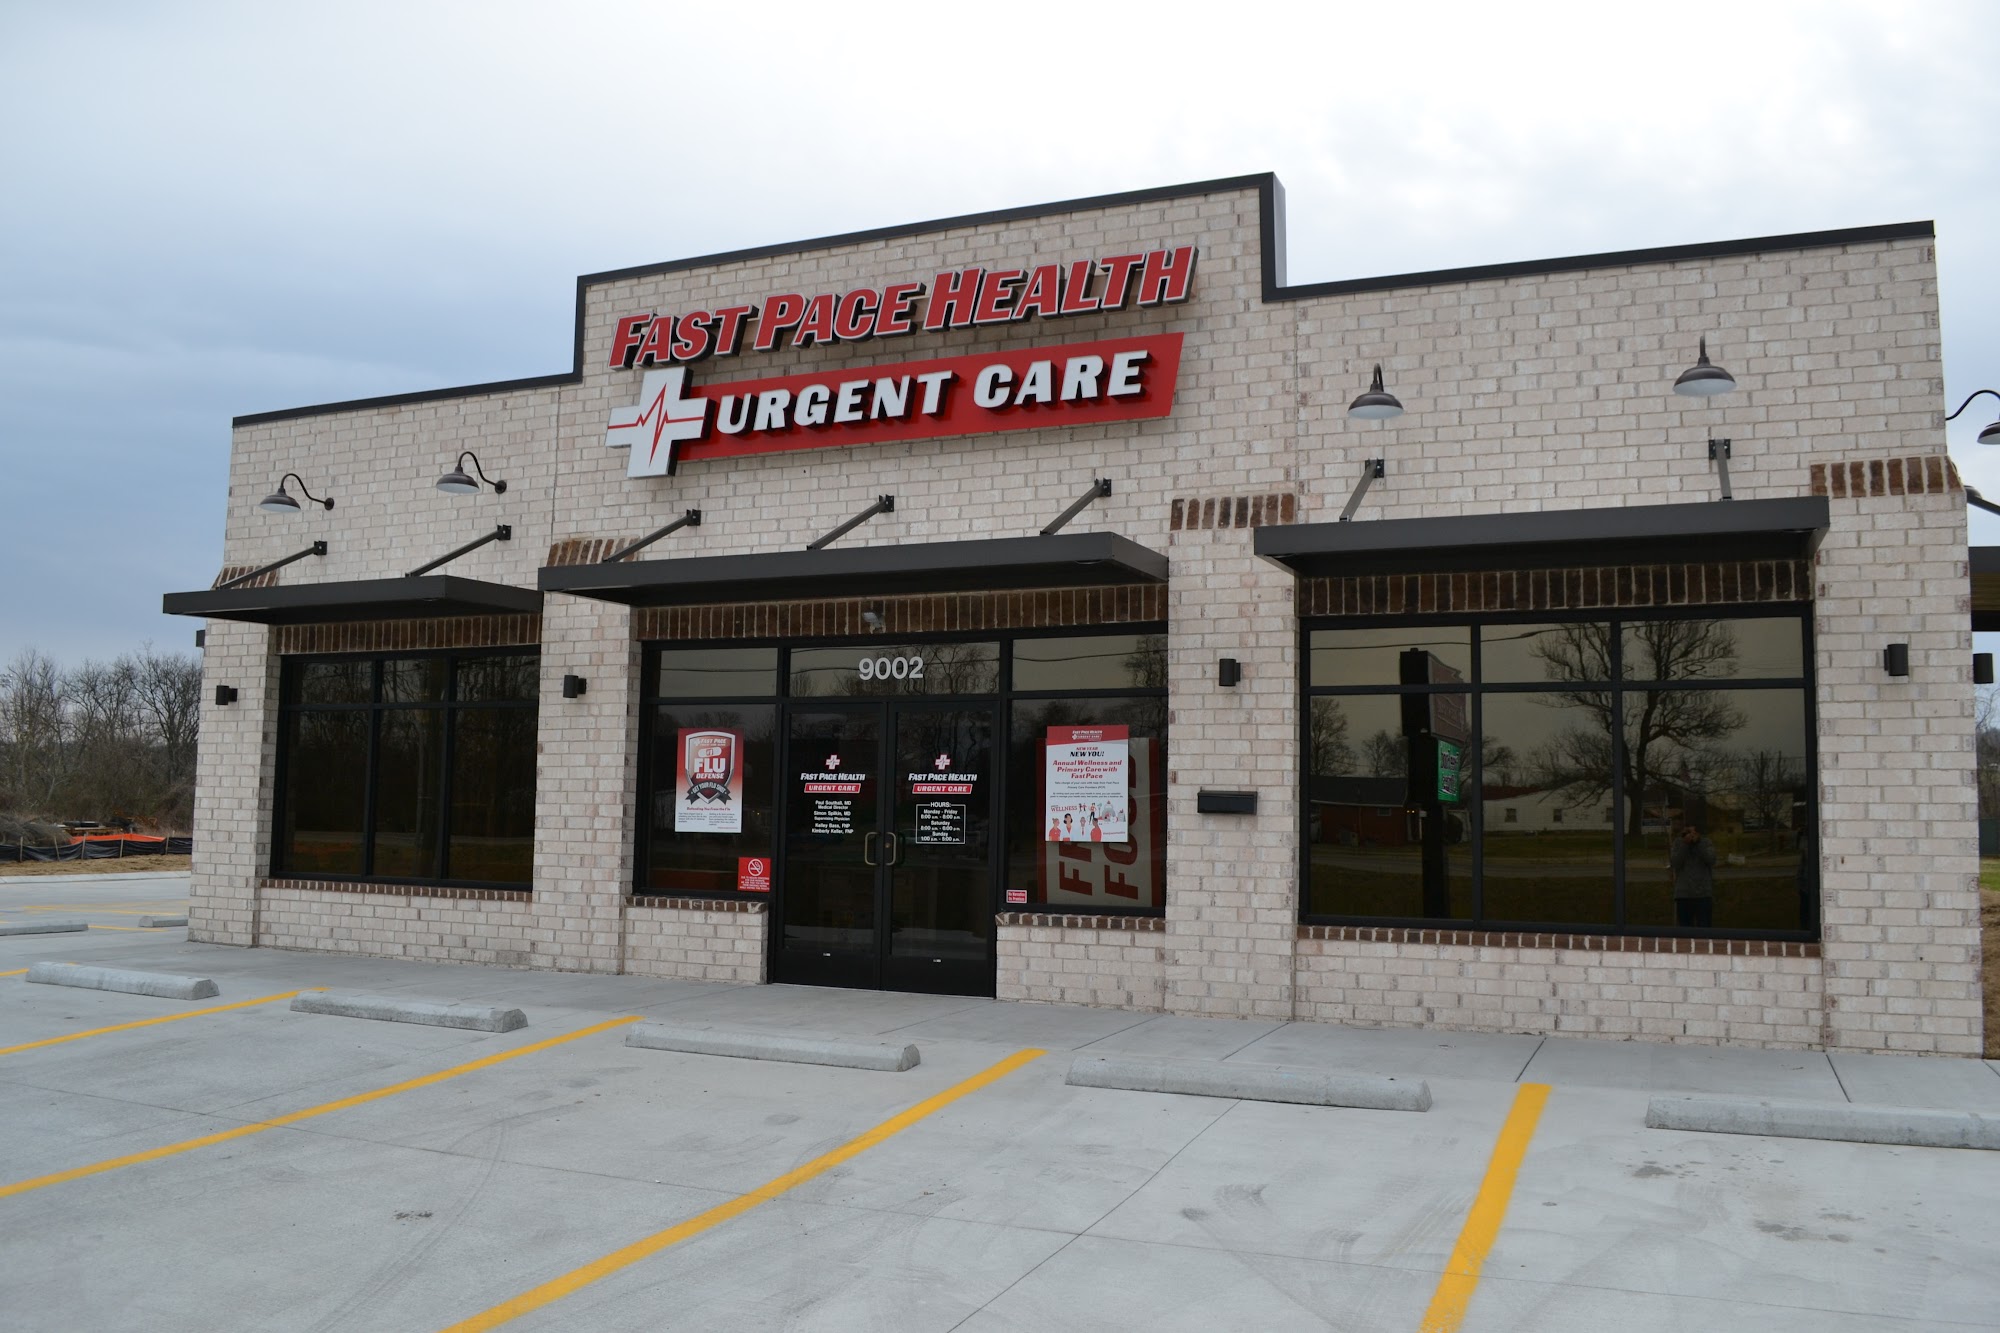 Fast Pace Health Urgent Care - Indianola, MS 616 US-82, Indianola Mississippi 38751